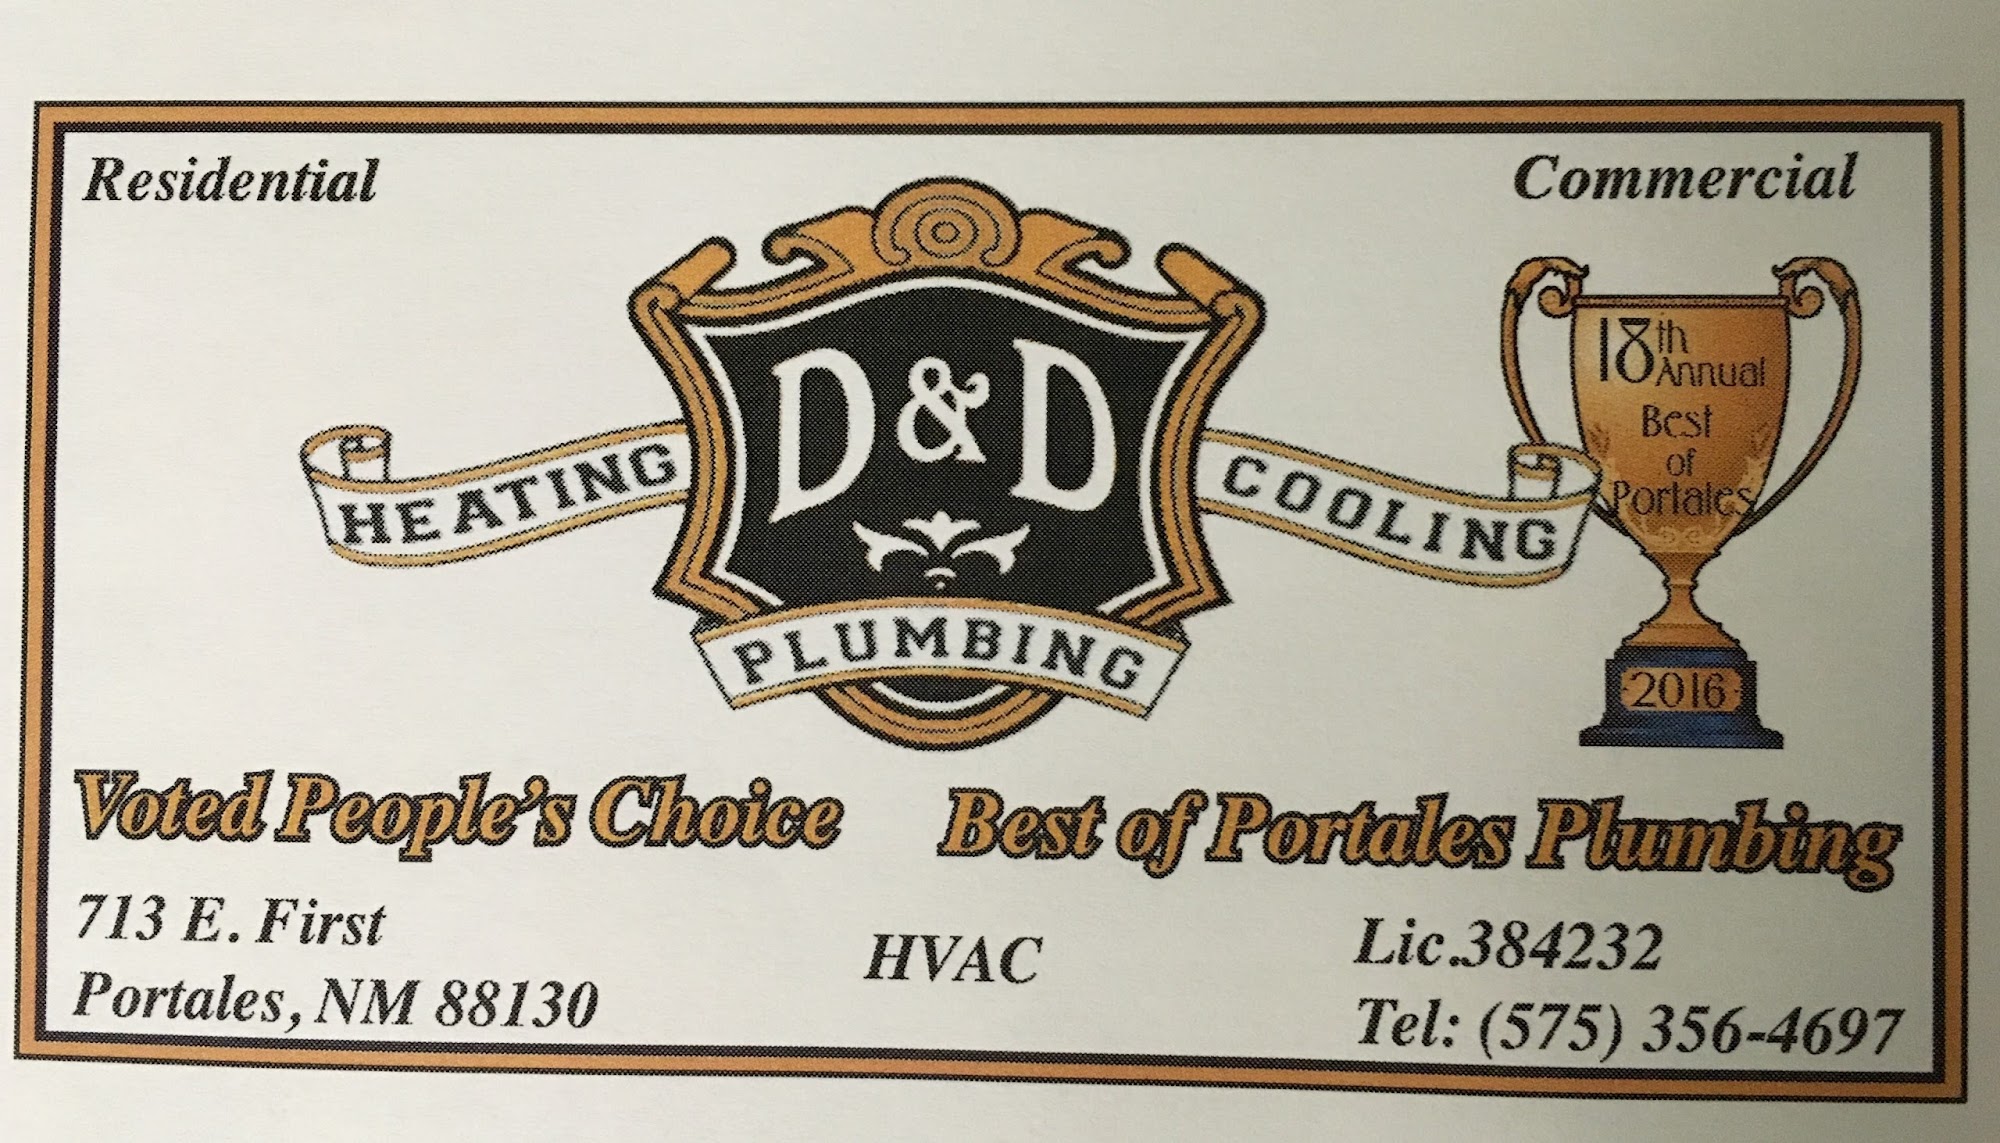 D & D Plumbing Heating & Cooling 713 E 1st St, Portales New Mexico 88130